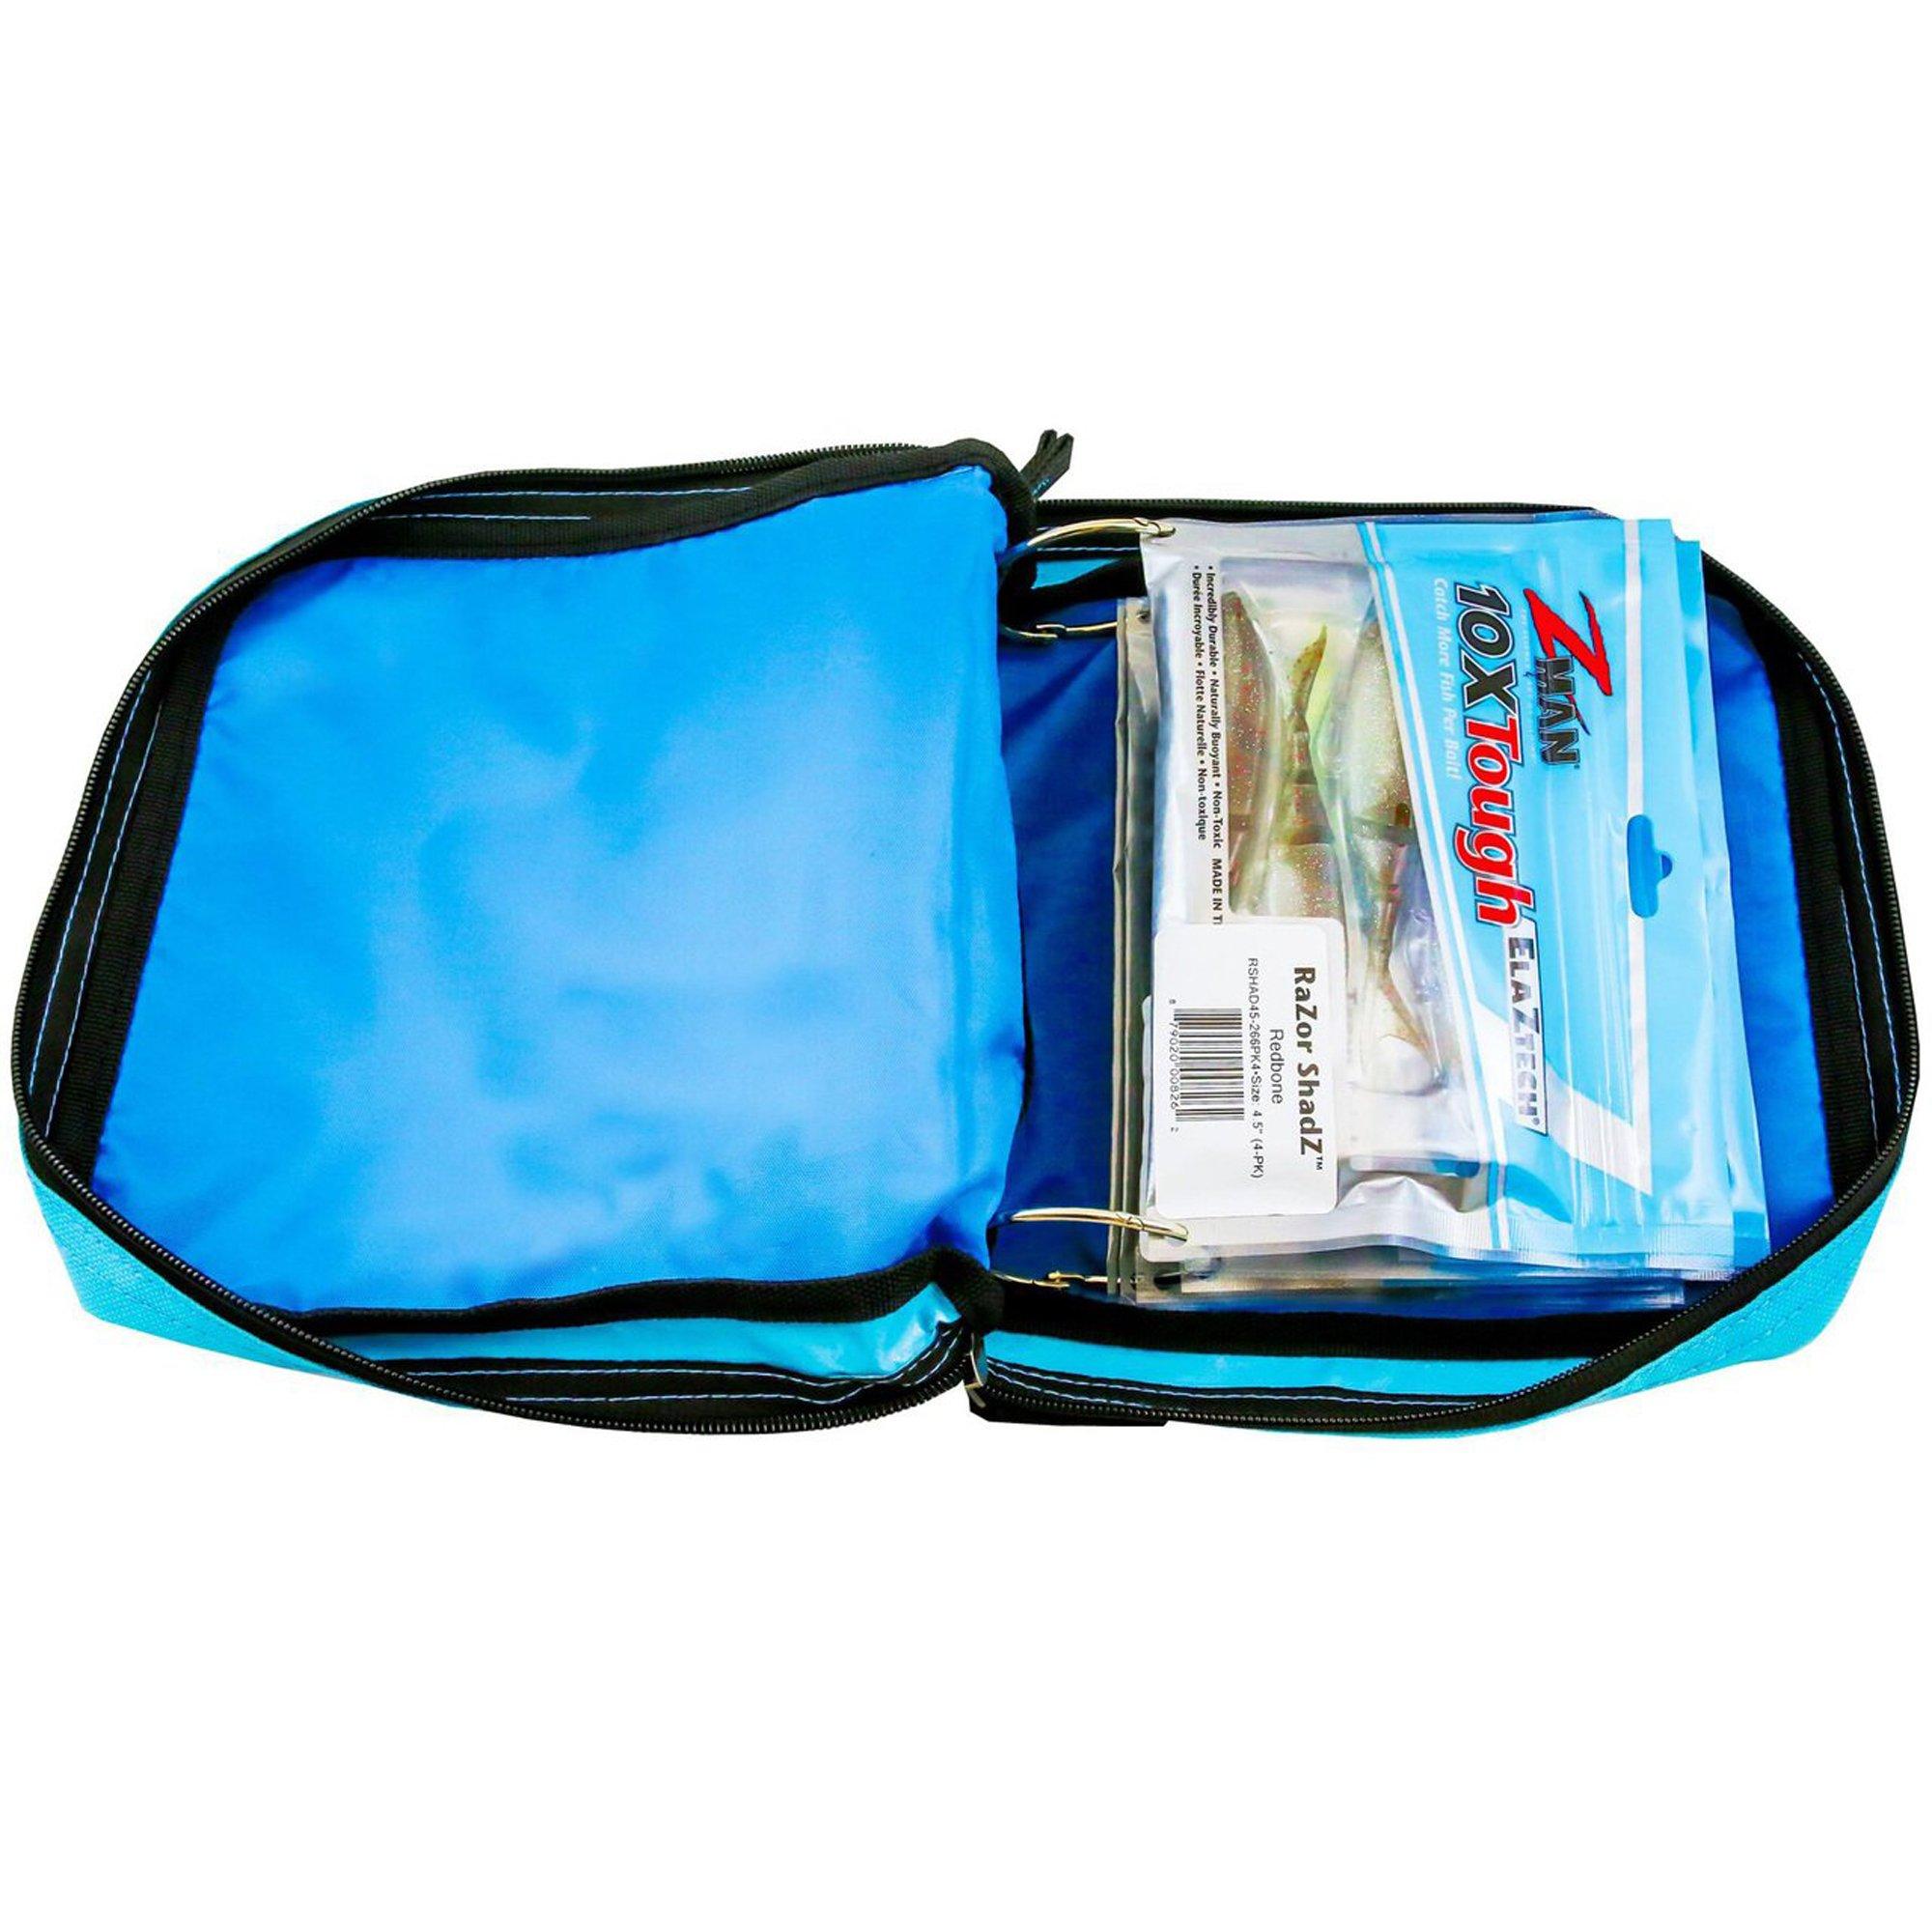 Z-Man Deluxe Small Binder Blue